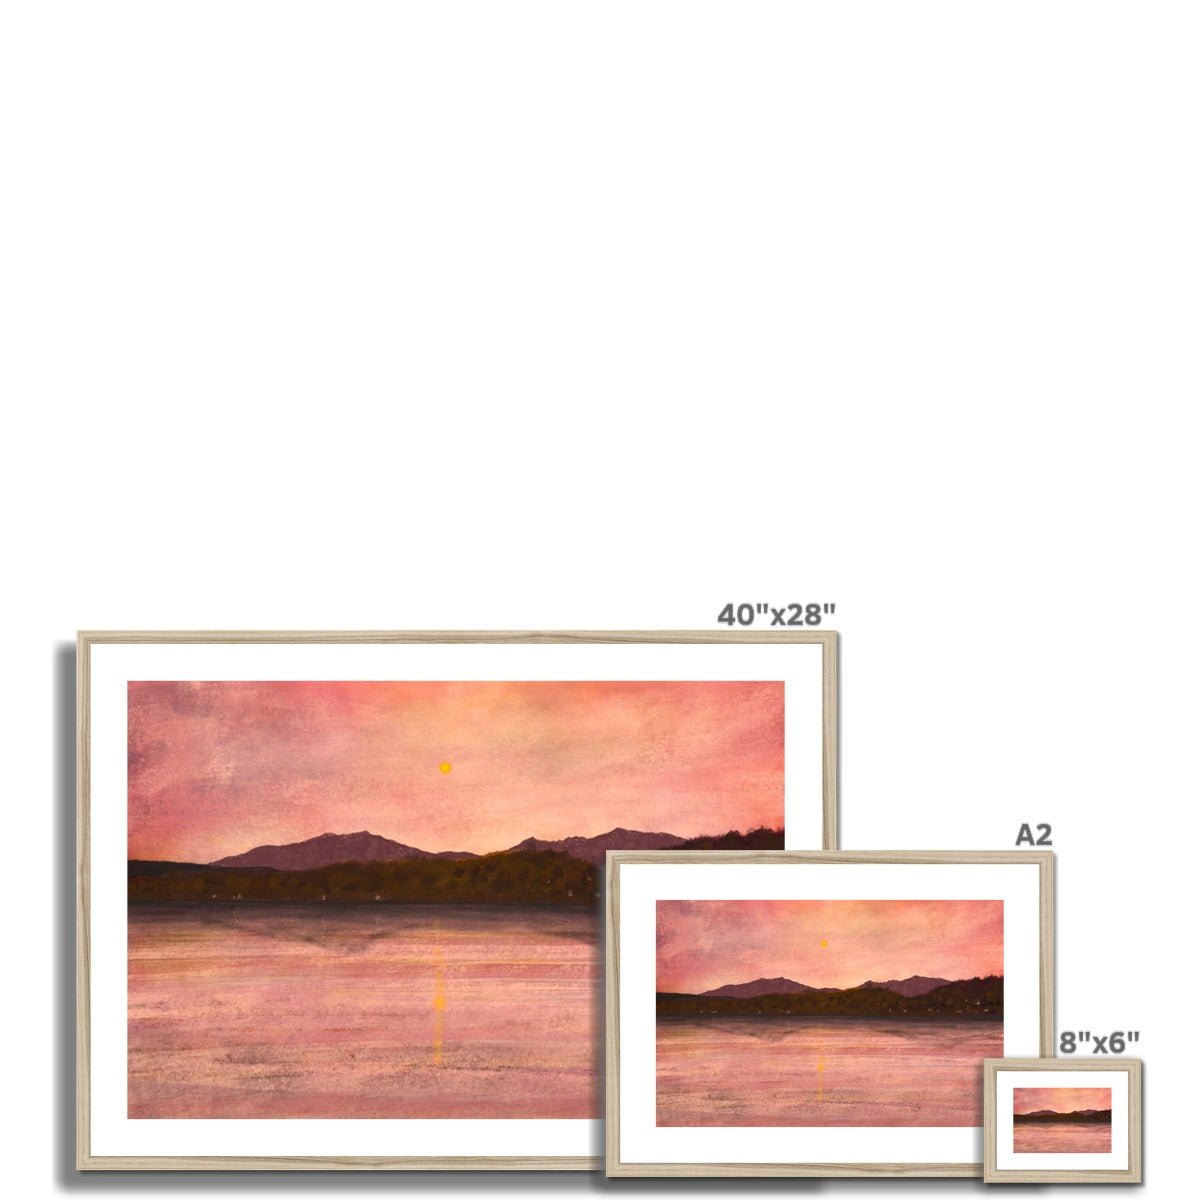 Dusk Over Arran & Bute Painting | Framed & Mounted Prints From Scotland-Framed & Mounted Prints-Arran Art Gallery-Paintings, Prints, Homeware, Art Gifts From Scotland By Scottish Artist Kevin Hunter